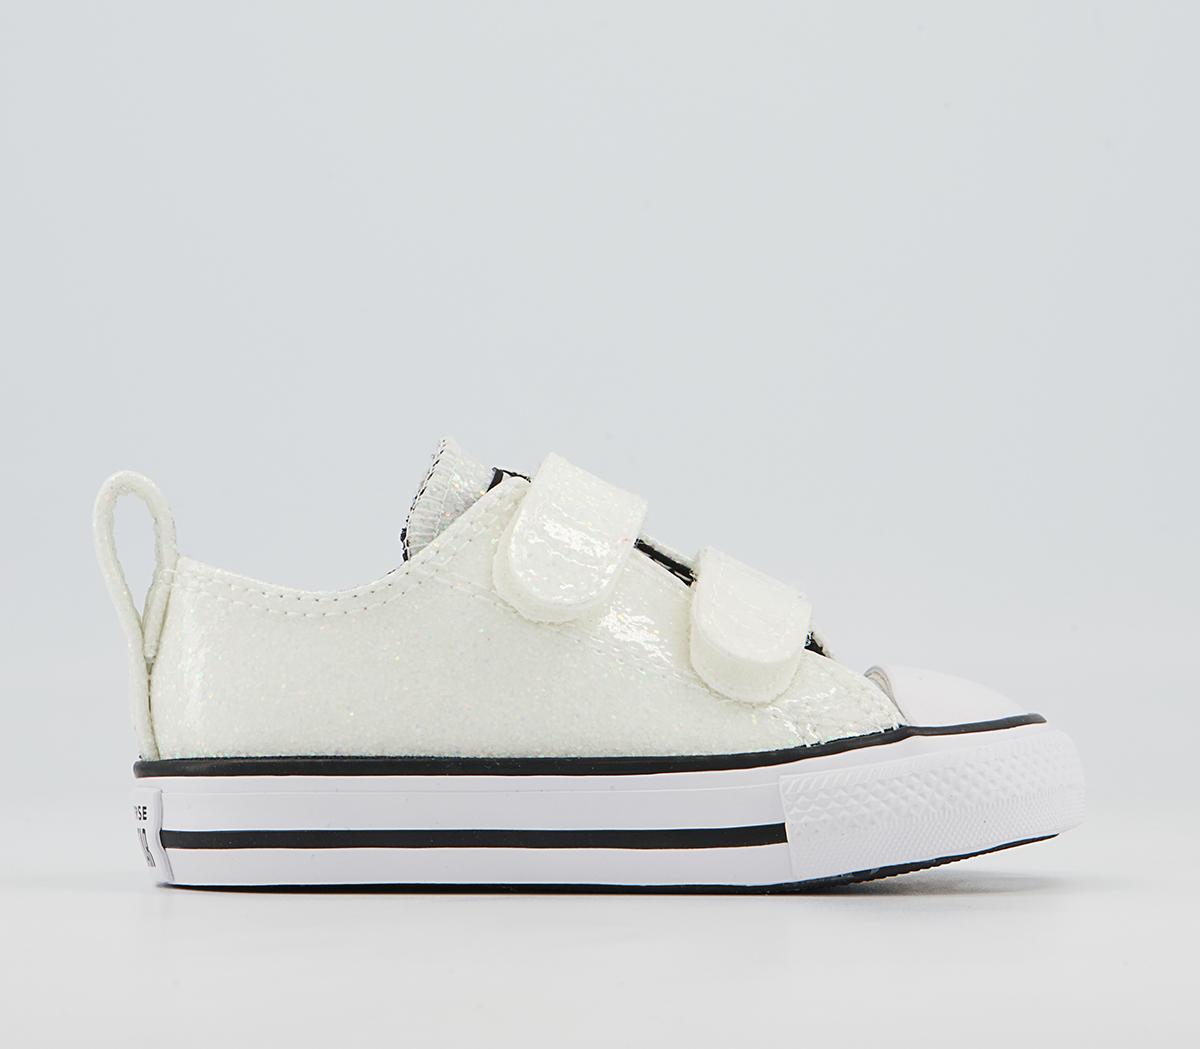 ConverseAll Star 2vlace TrainersSilver Black White